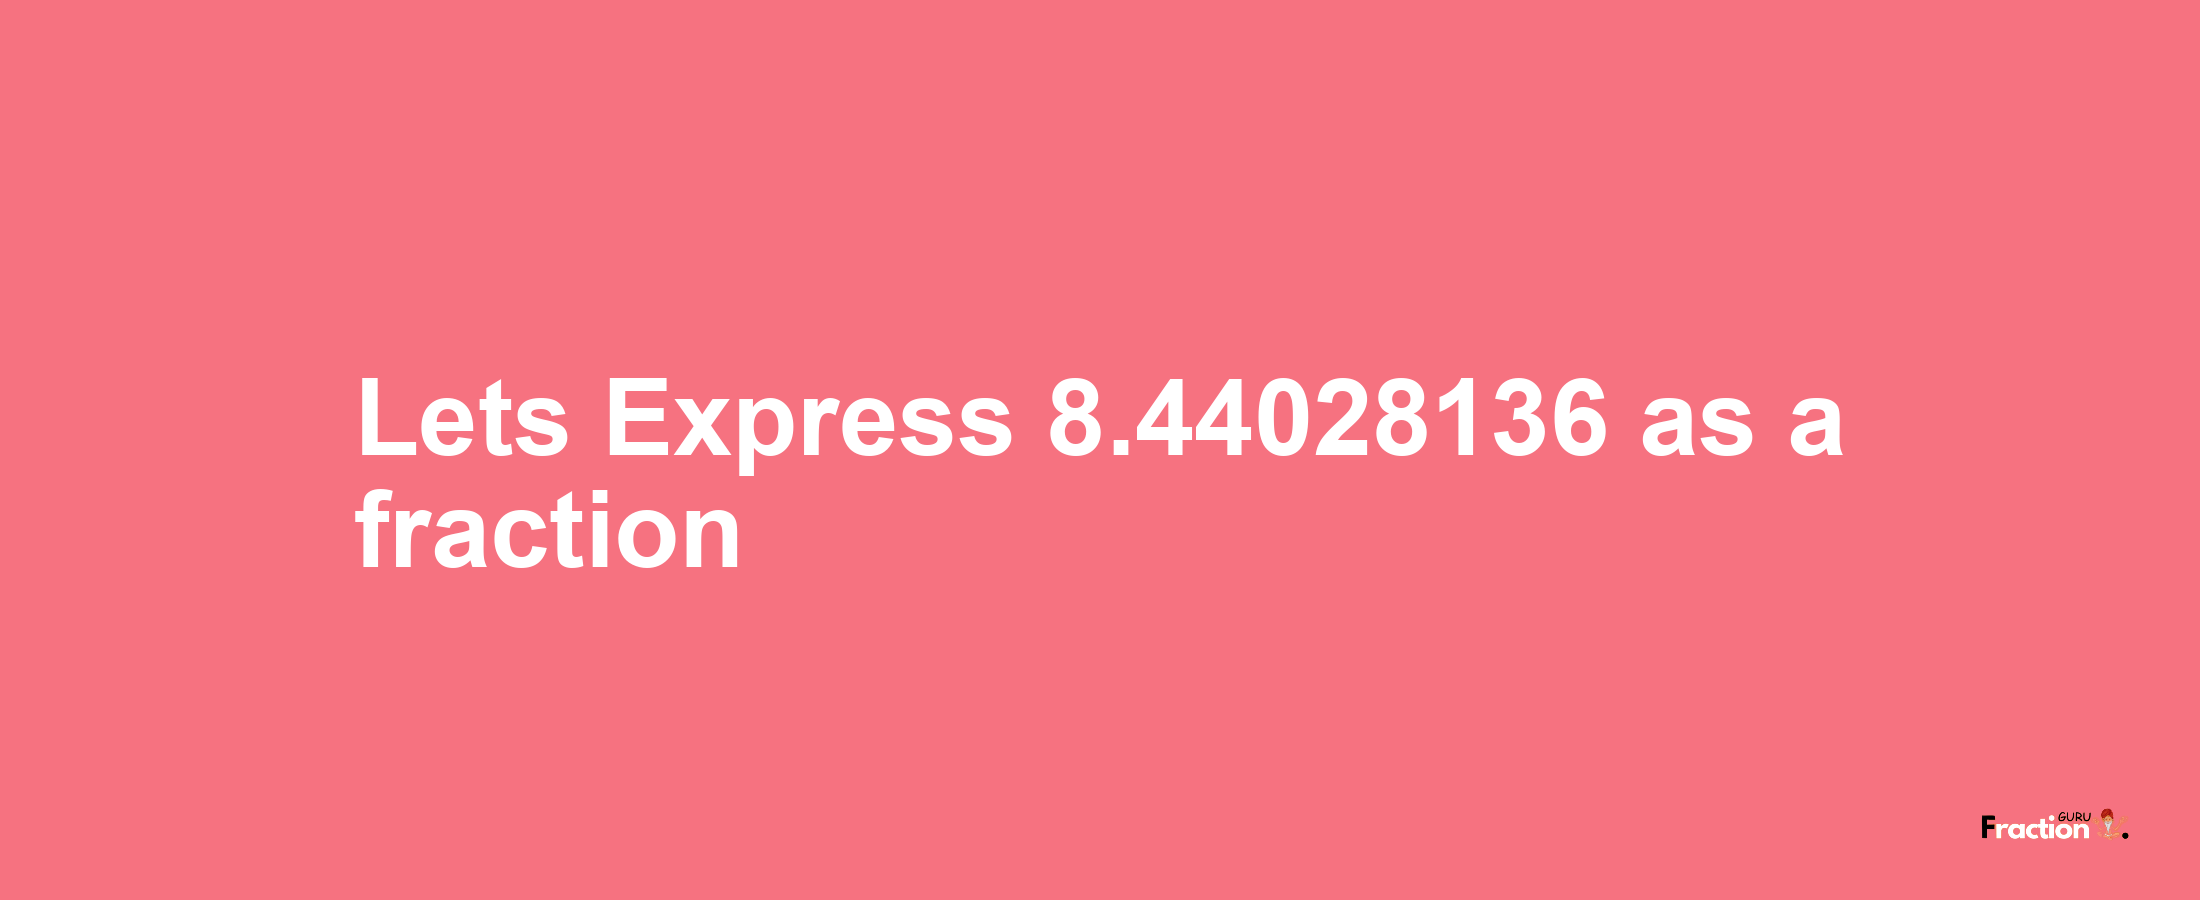 Lets Express 8.44028136 as afraction